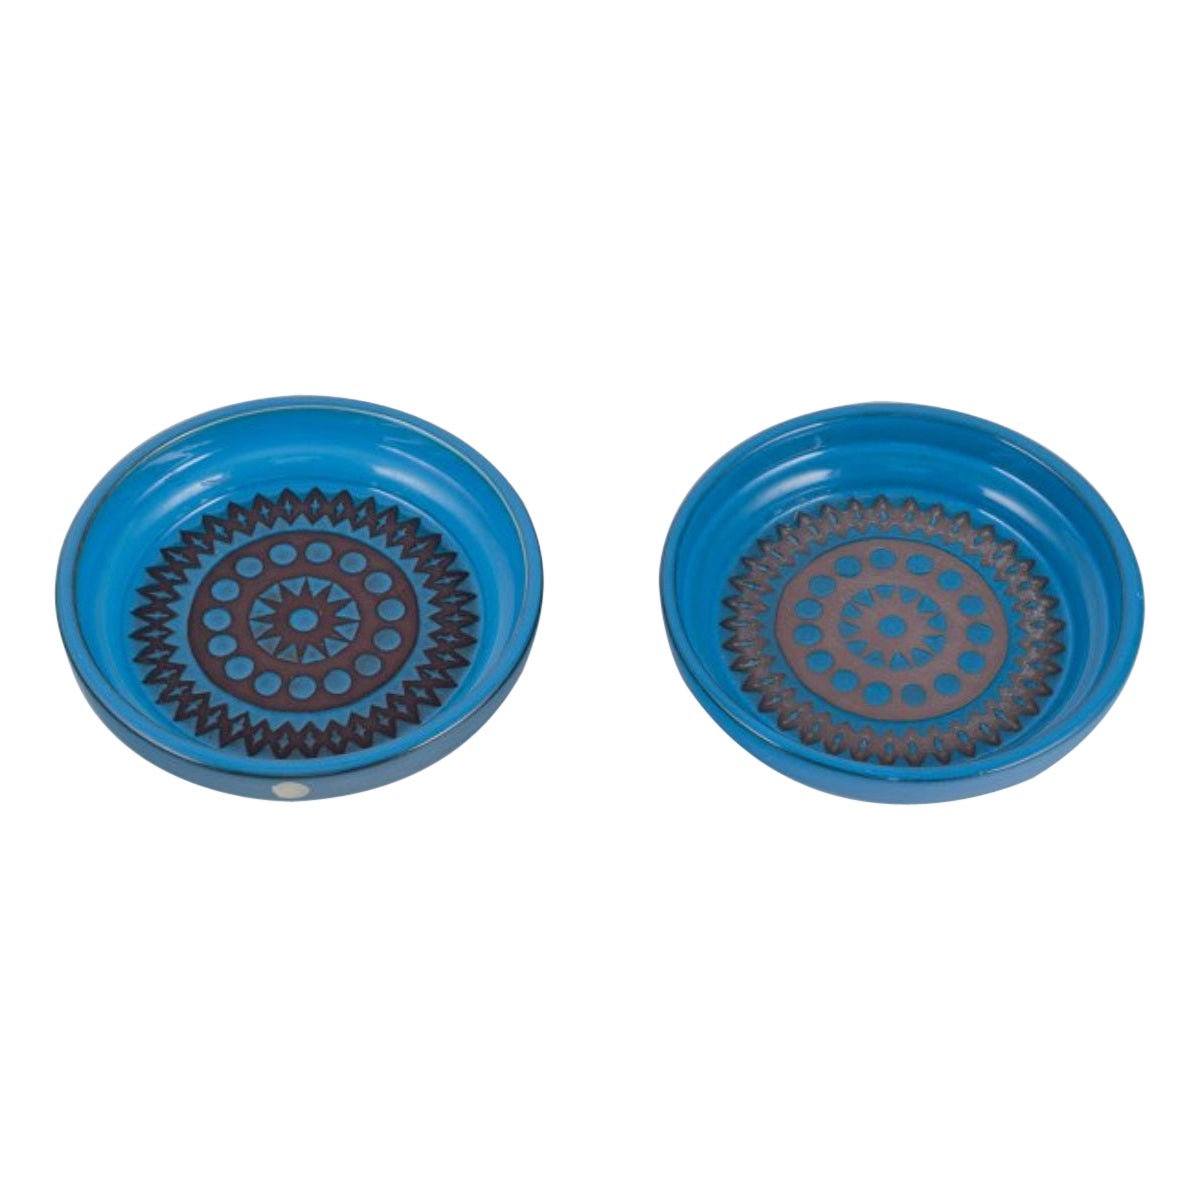 Mari Simmulson for Upsala Ekeby. Pair of low ceramic bowls with blue-toned glaze For Sale